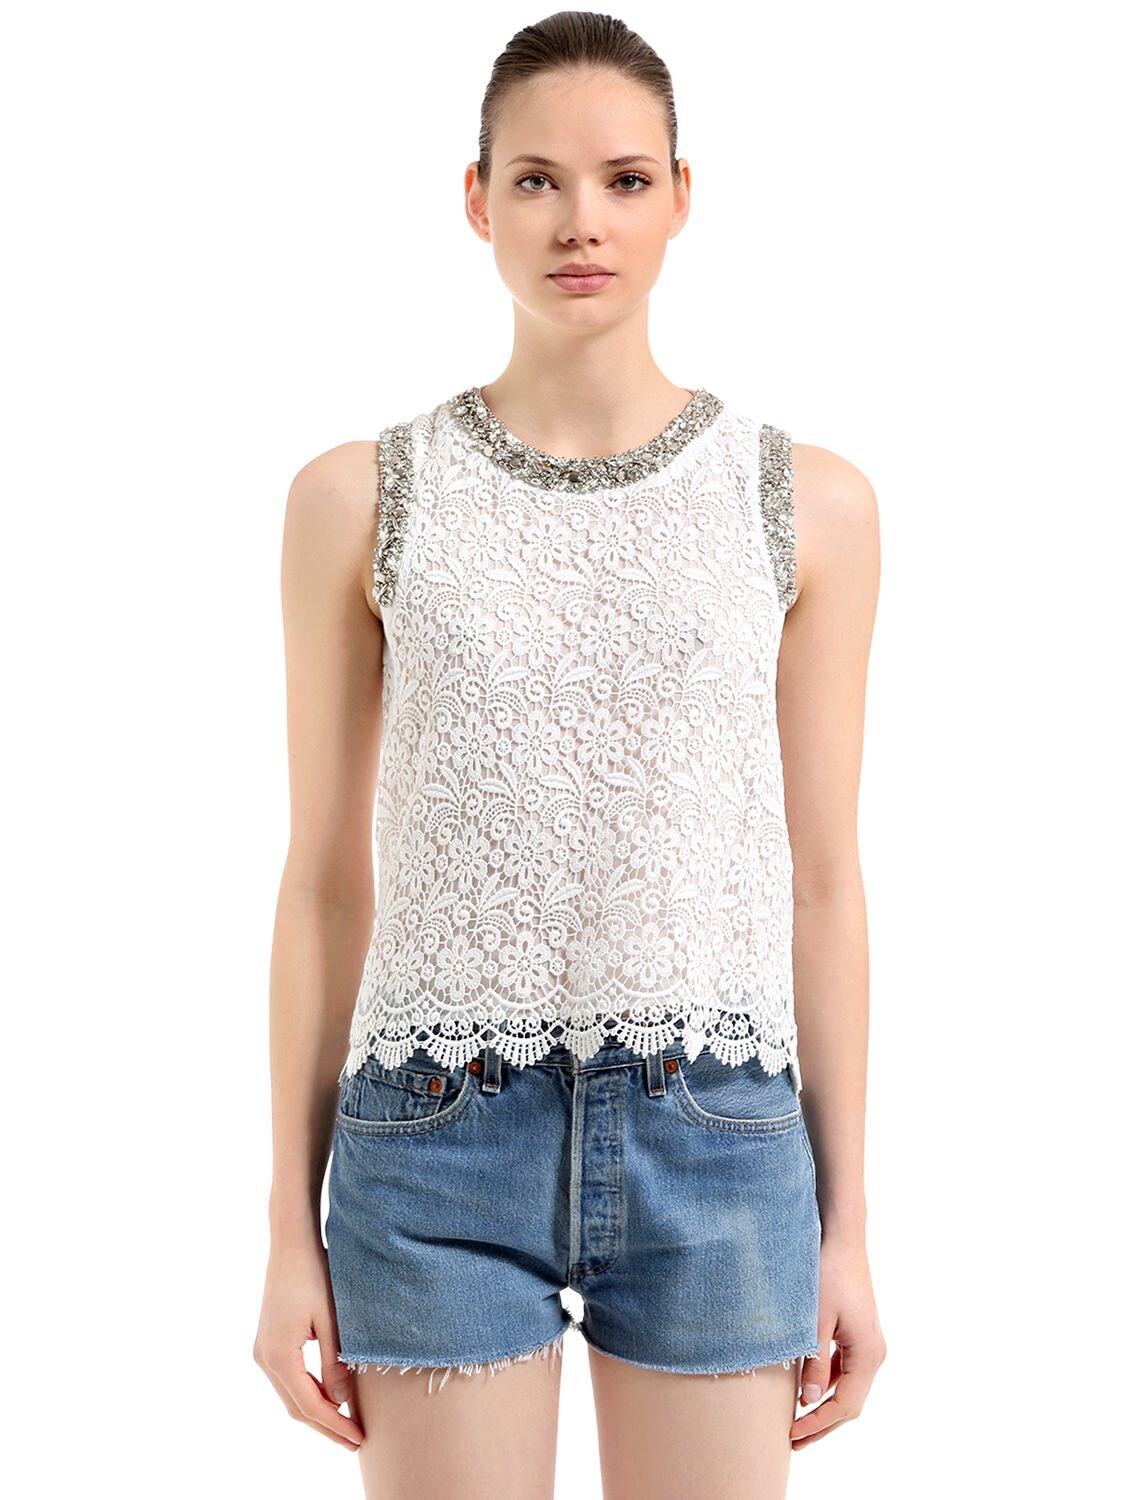 T.a.g.g. Embellished Cotton & Lace Top In White